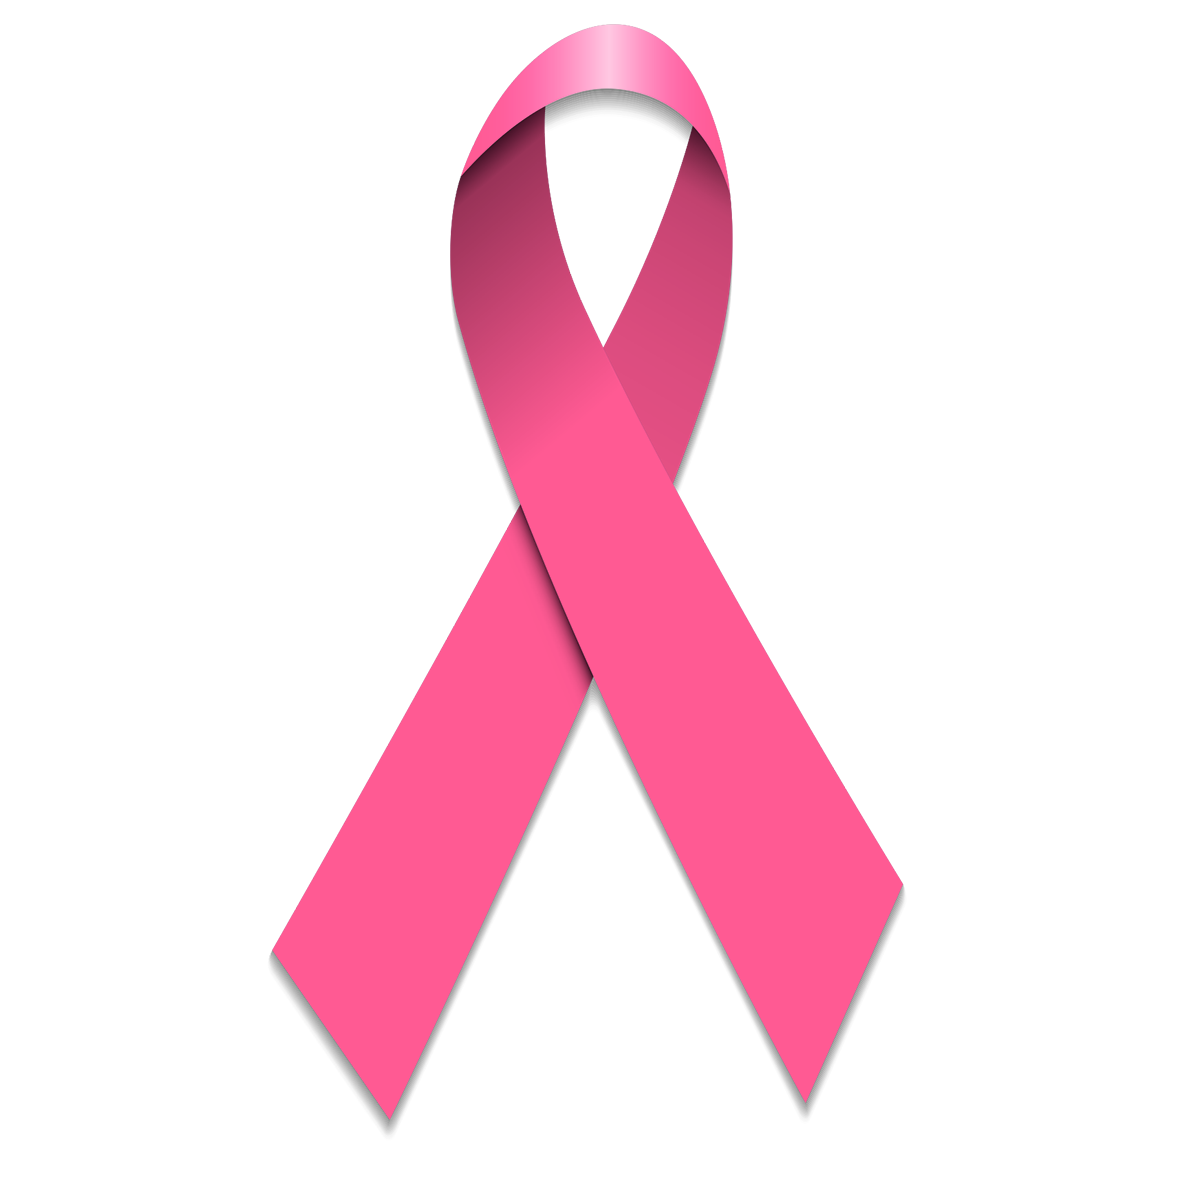 Image result for breast cancer ribbon